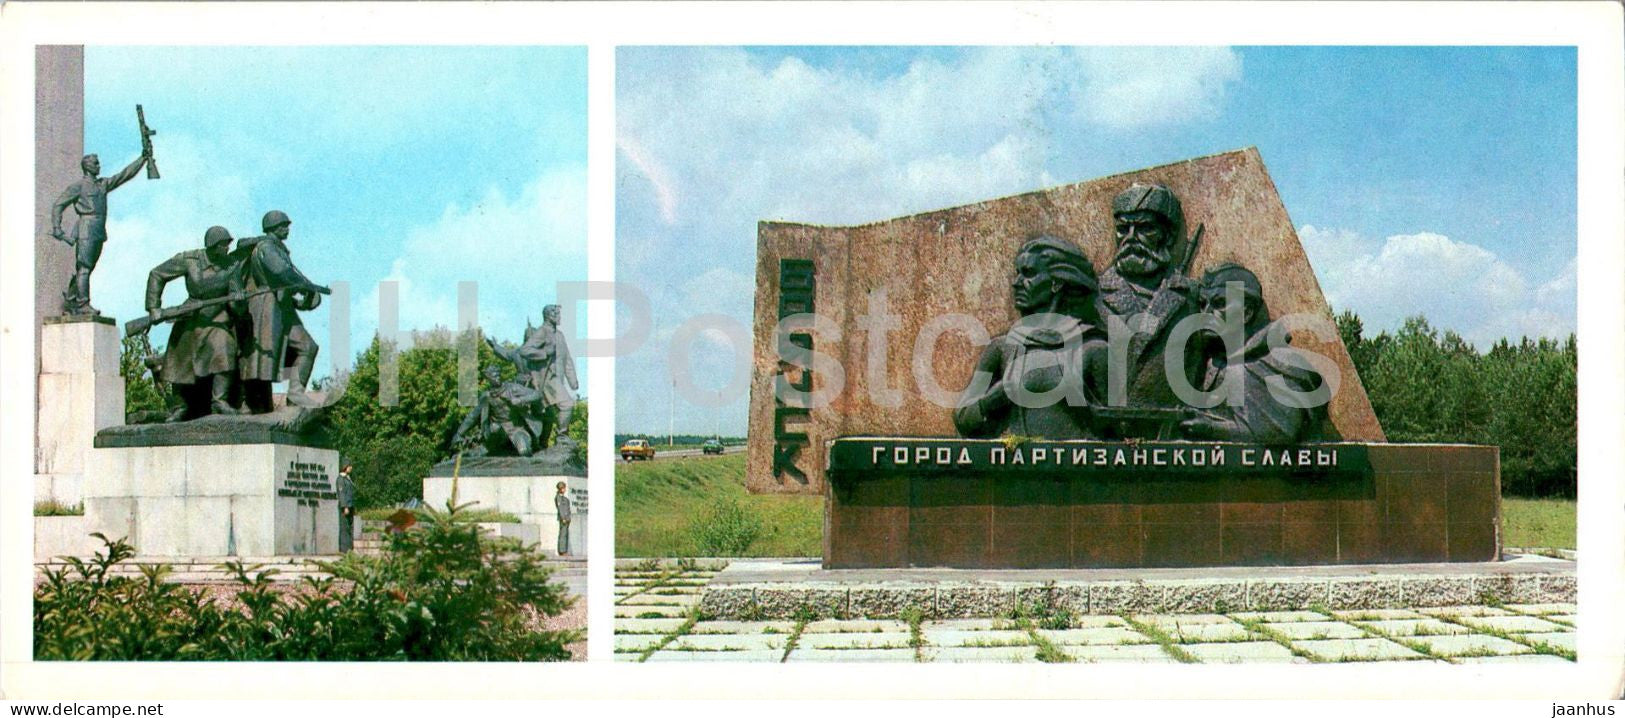 Bryansk - monument to Soviet partisan soldiers - city of partisan glory monument - 1980 - Russia USSR - unused - JH Postcards